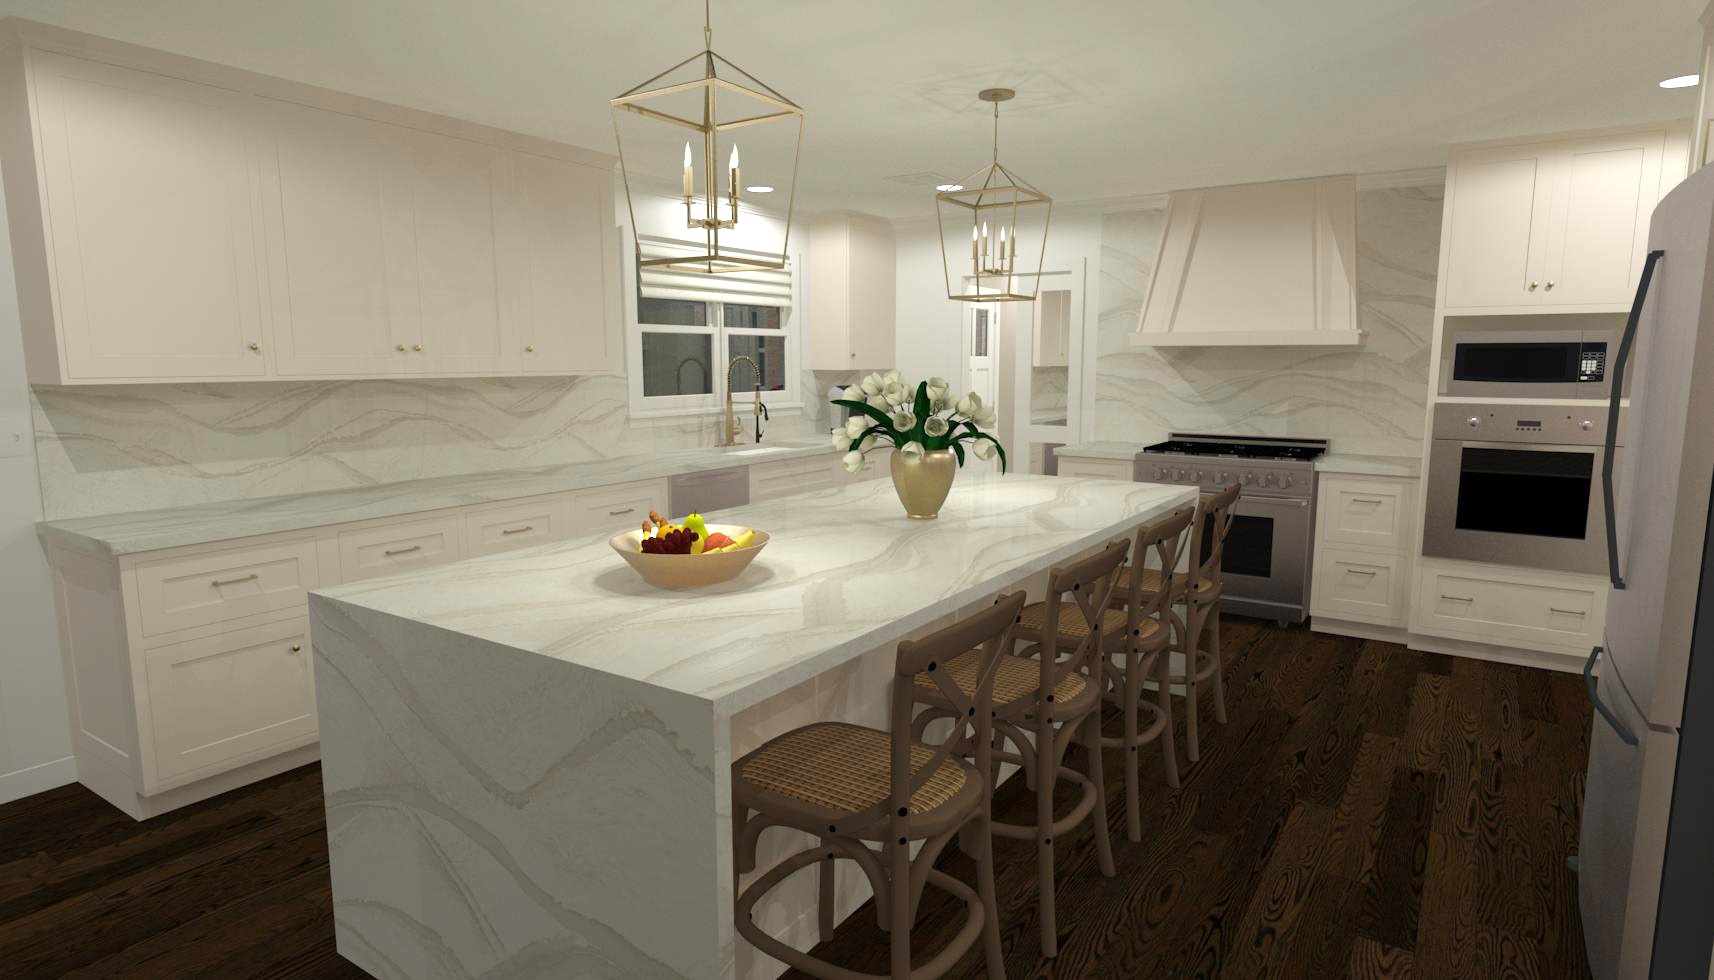 The rendering of a kitchen with white cabinets, gold fixtures and an island with a white waterfall countertop.